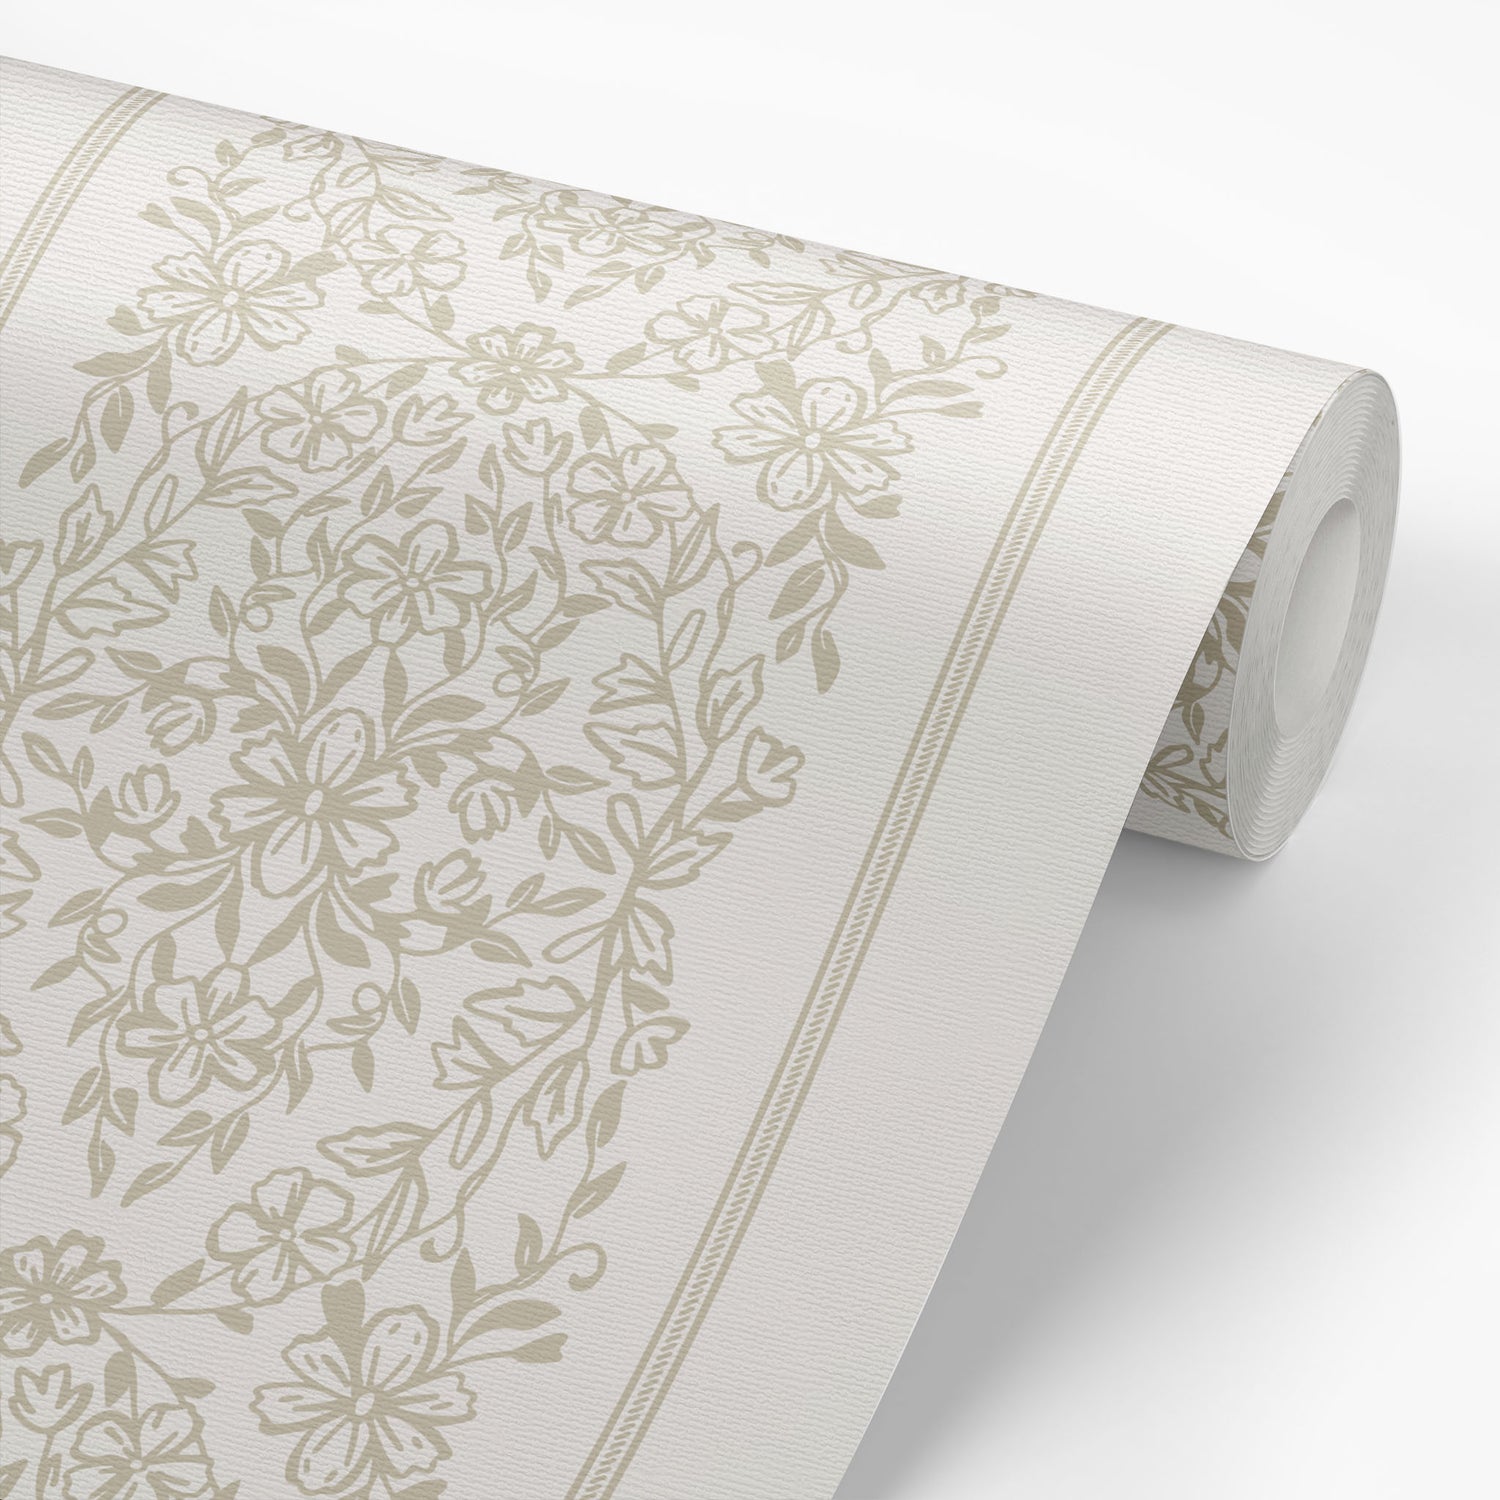 The classic and elevated design, adorned in a timeless cream hue shown on a wallpaper roll.